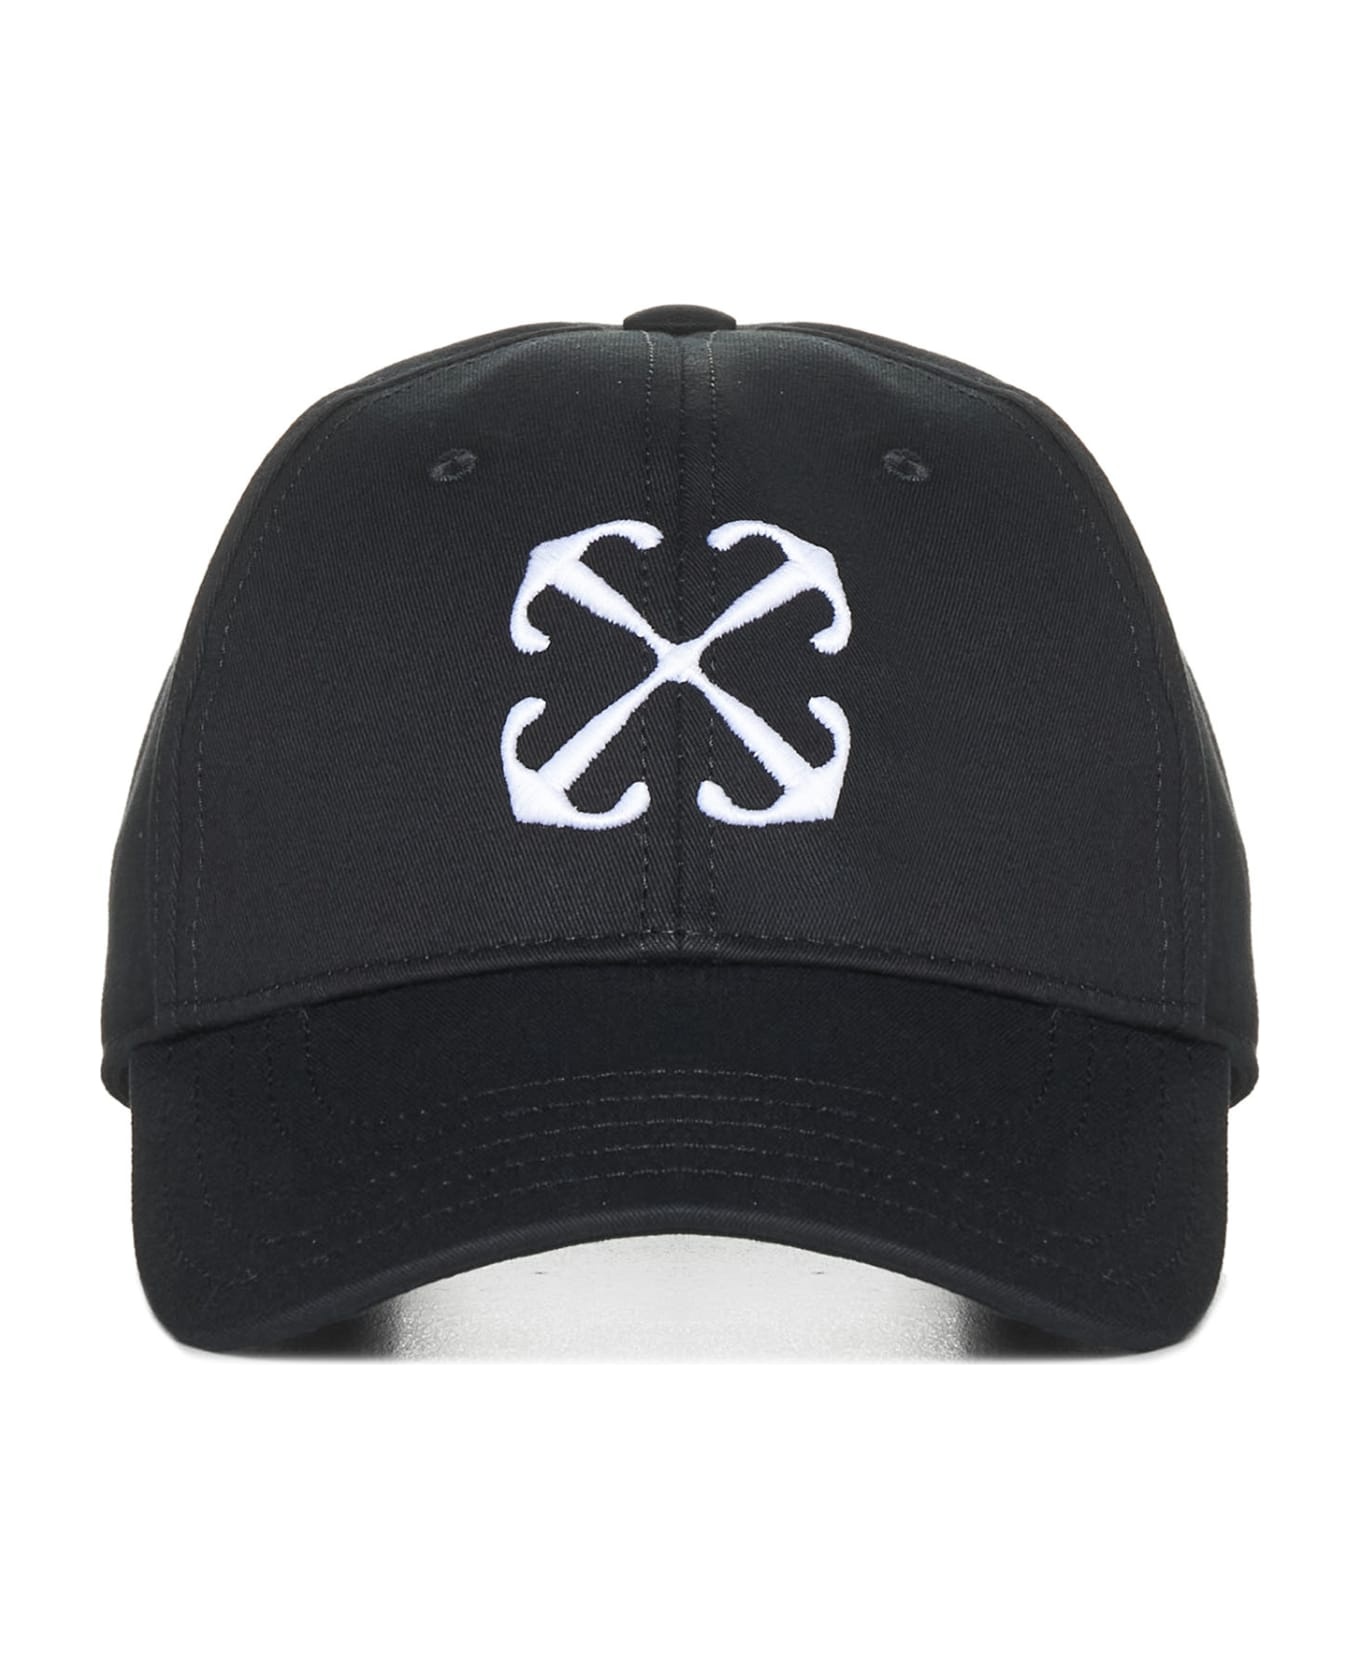 Baseball Cap With Embroidery - 1